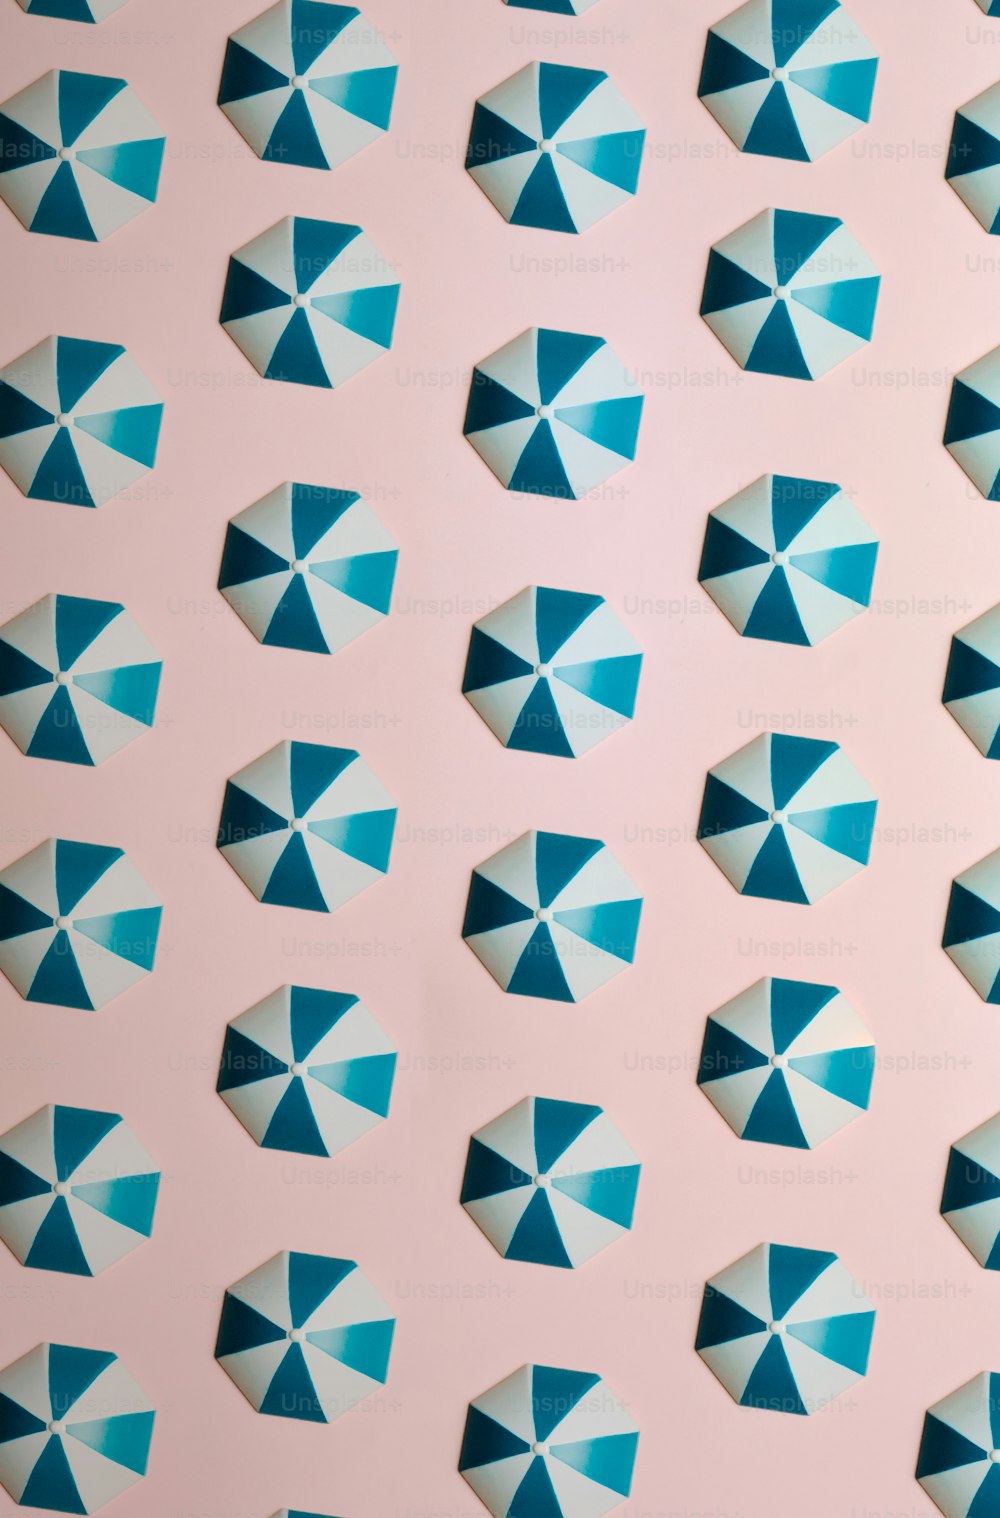 a pattern of blue and white umbrellas on a pink background